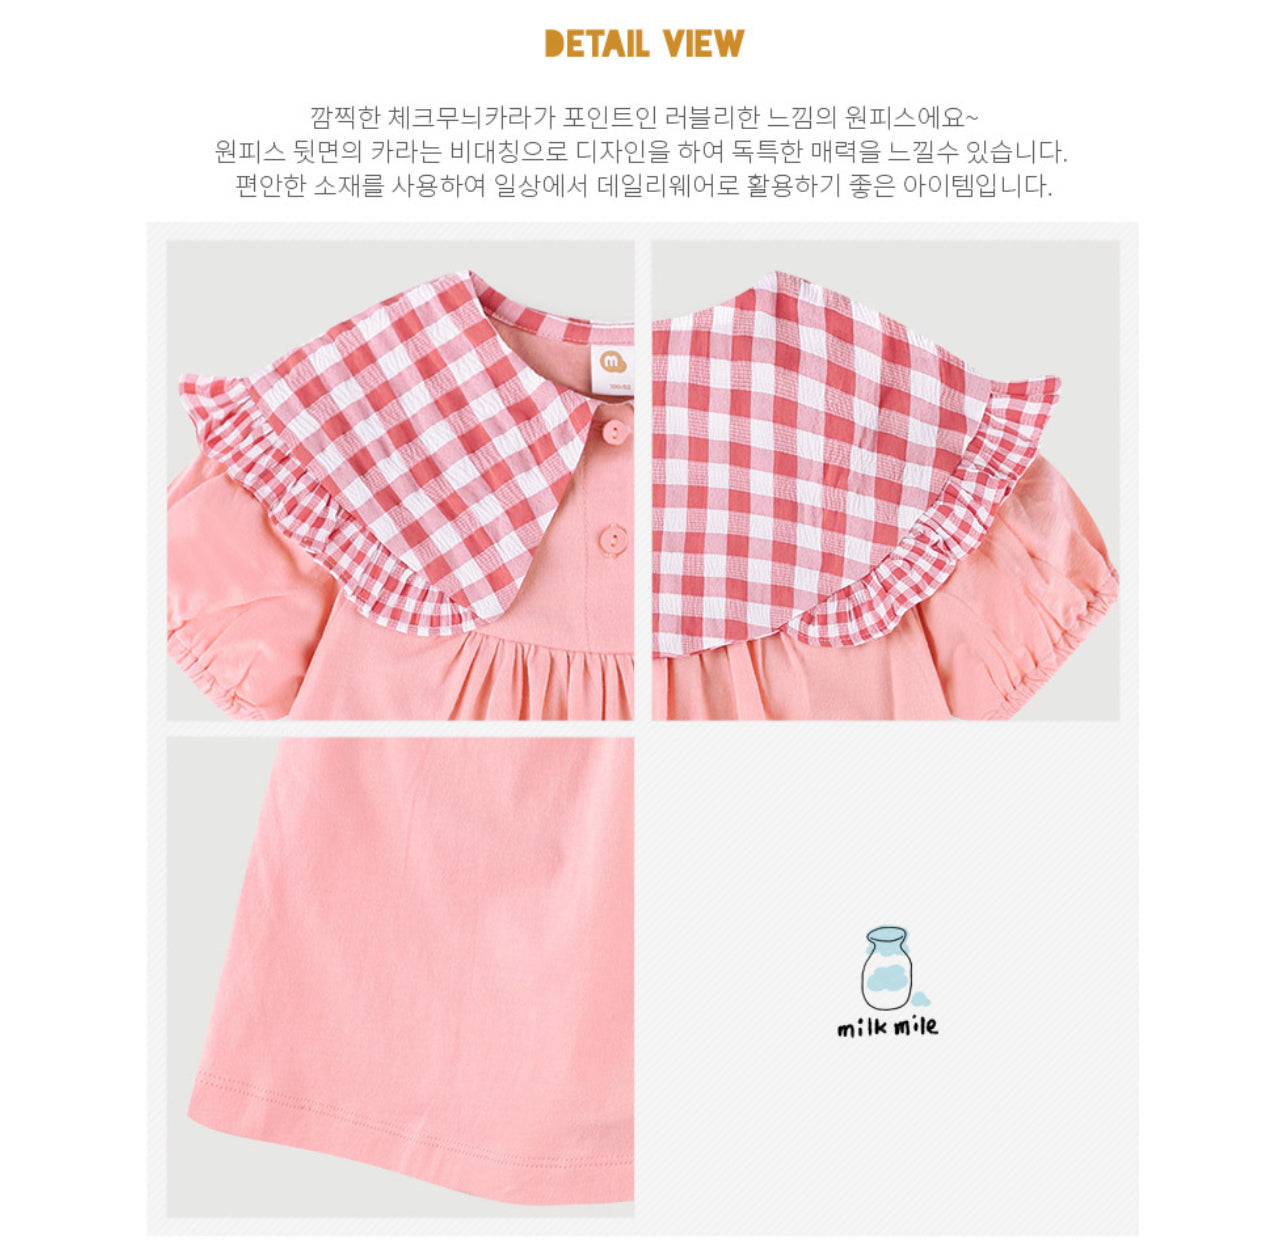 New Check Sweet Dress - Red / Pink